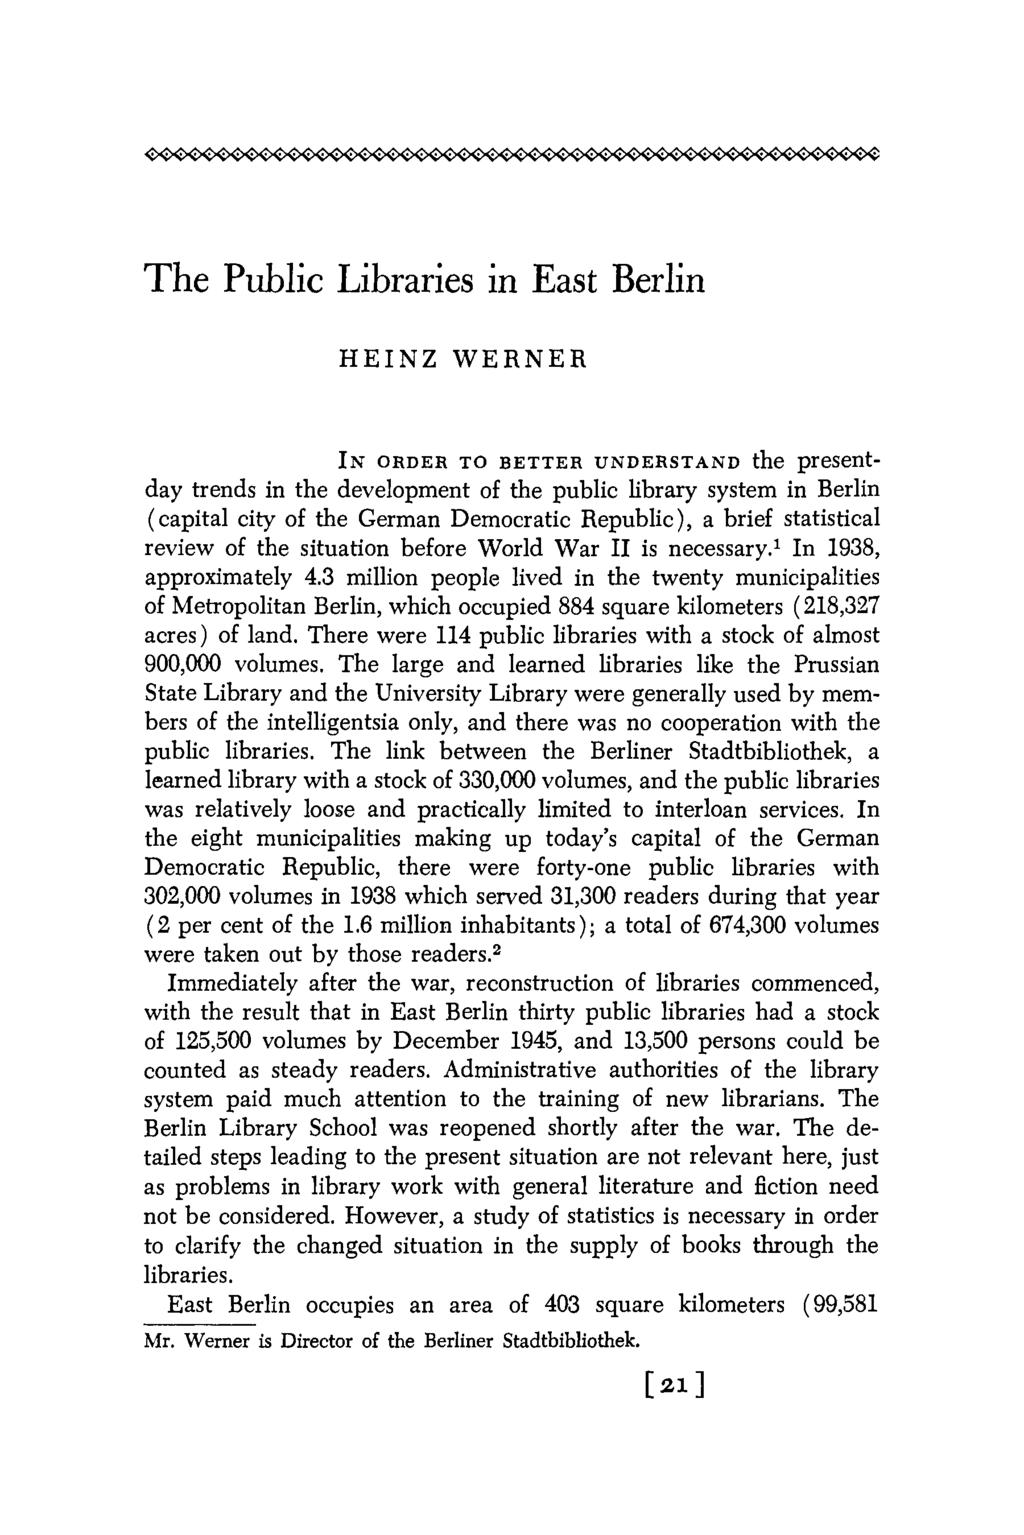 The Public Libraries in East Berlin HEINZ WERNER IN ORDER TO BETTER UN ERSTAN the presentday trends in the development of the public library system in Berlin (capital city of the German Democratic